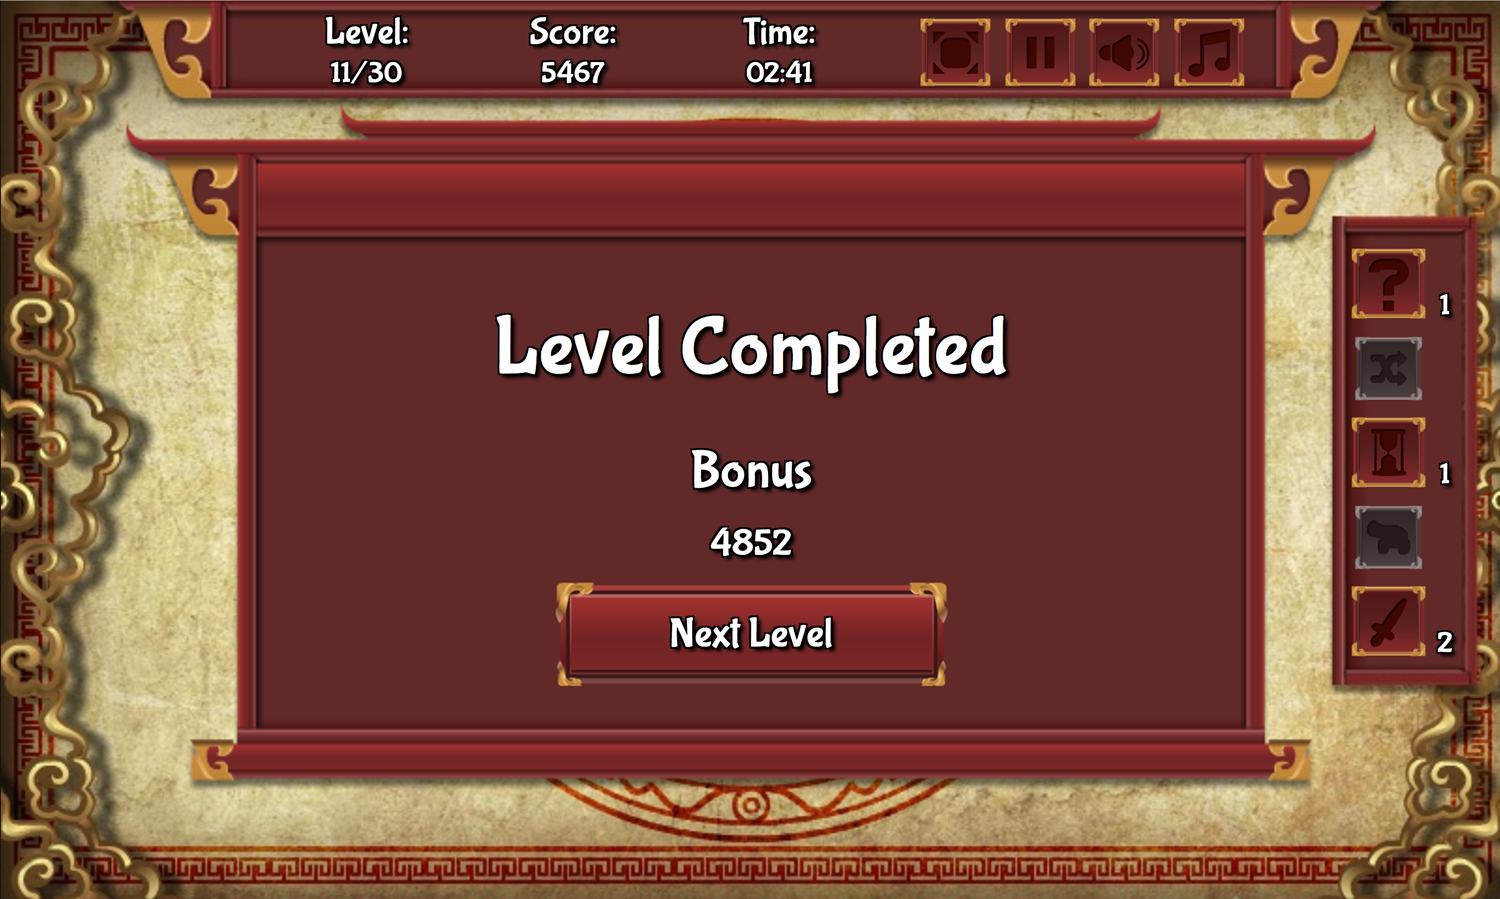 Mahjong Connect 2 Game Level Completed Screen Screenshot.